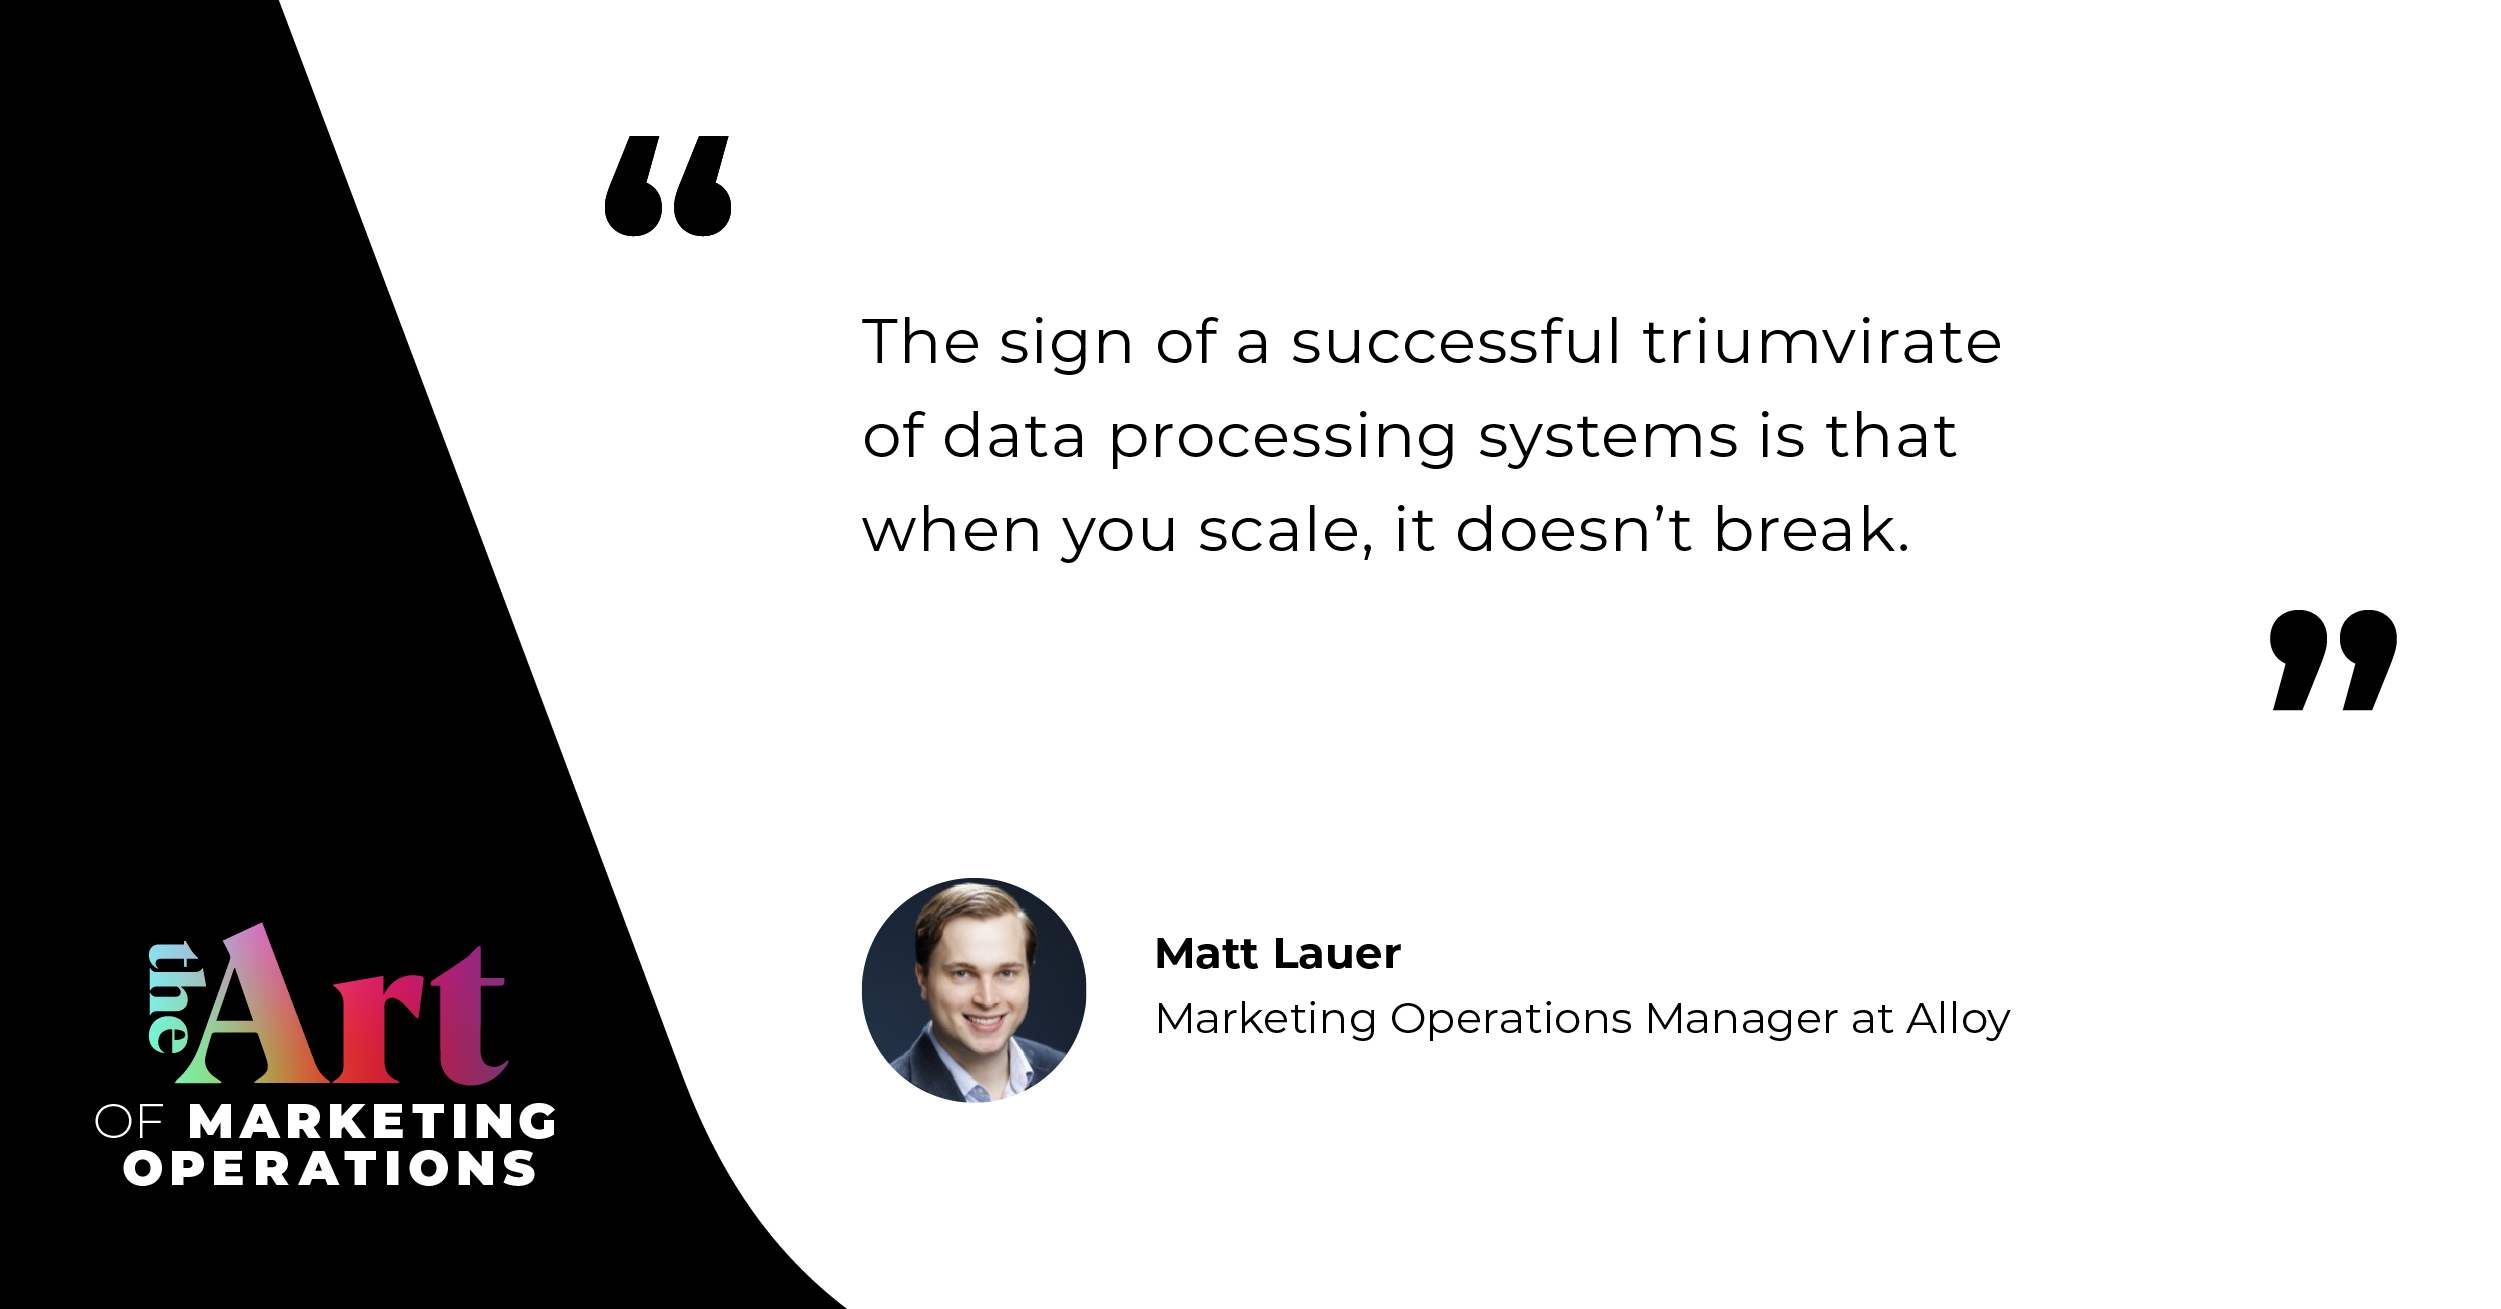 "The sign of a successful triumvirate of data processing systems is that when you scale, it doesn't break." - Matt Lauer